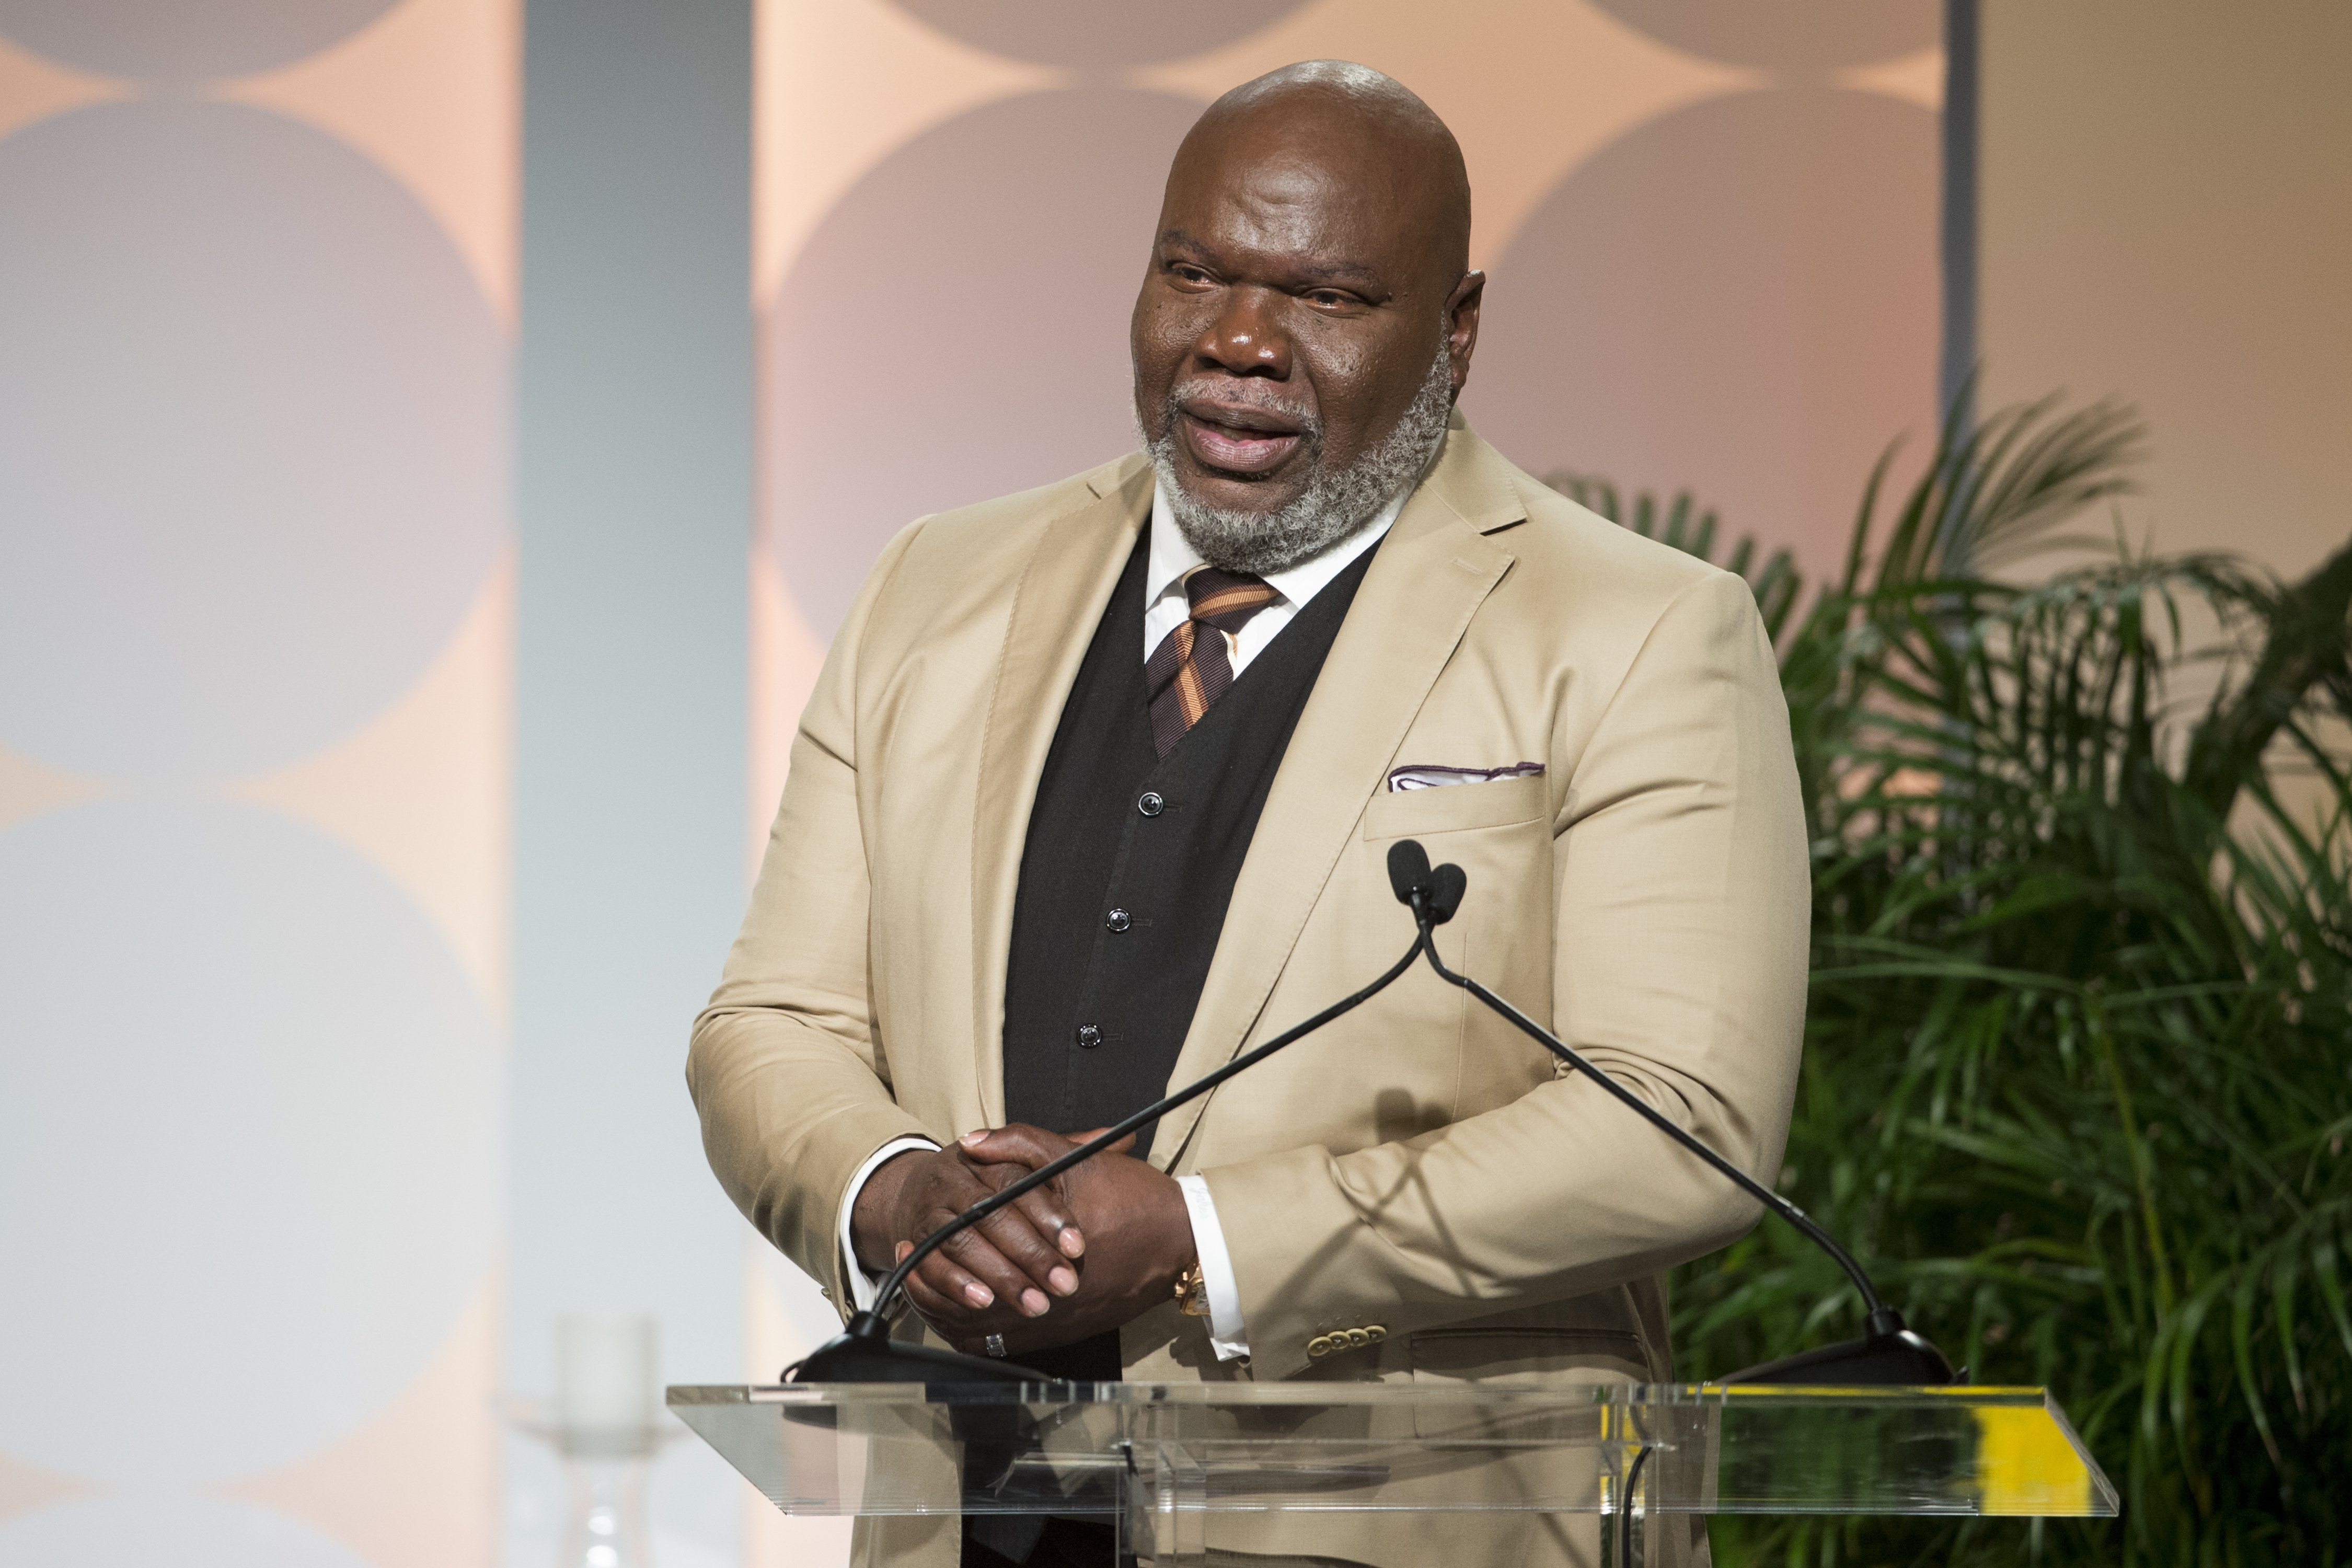 Bishop T.D. Jakes speaks onstage at the MegaFest's International Faith & Family Film Festival on June 30, 2017 in Dallas, Texas. | Photo: Getty Images